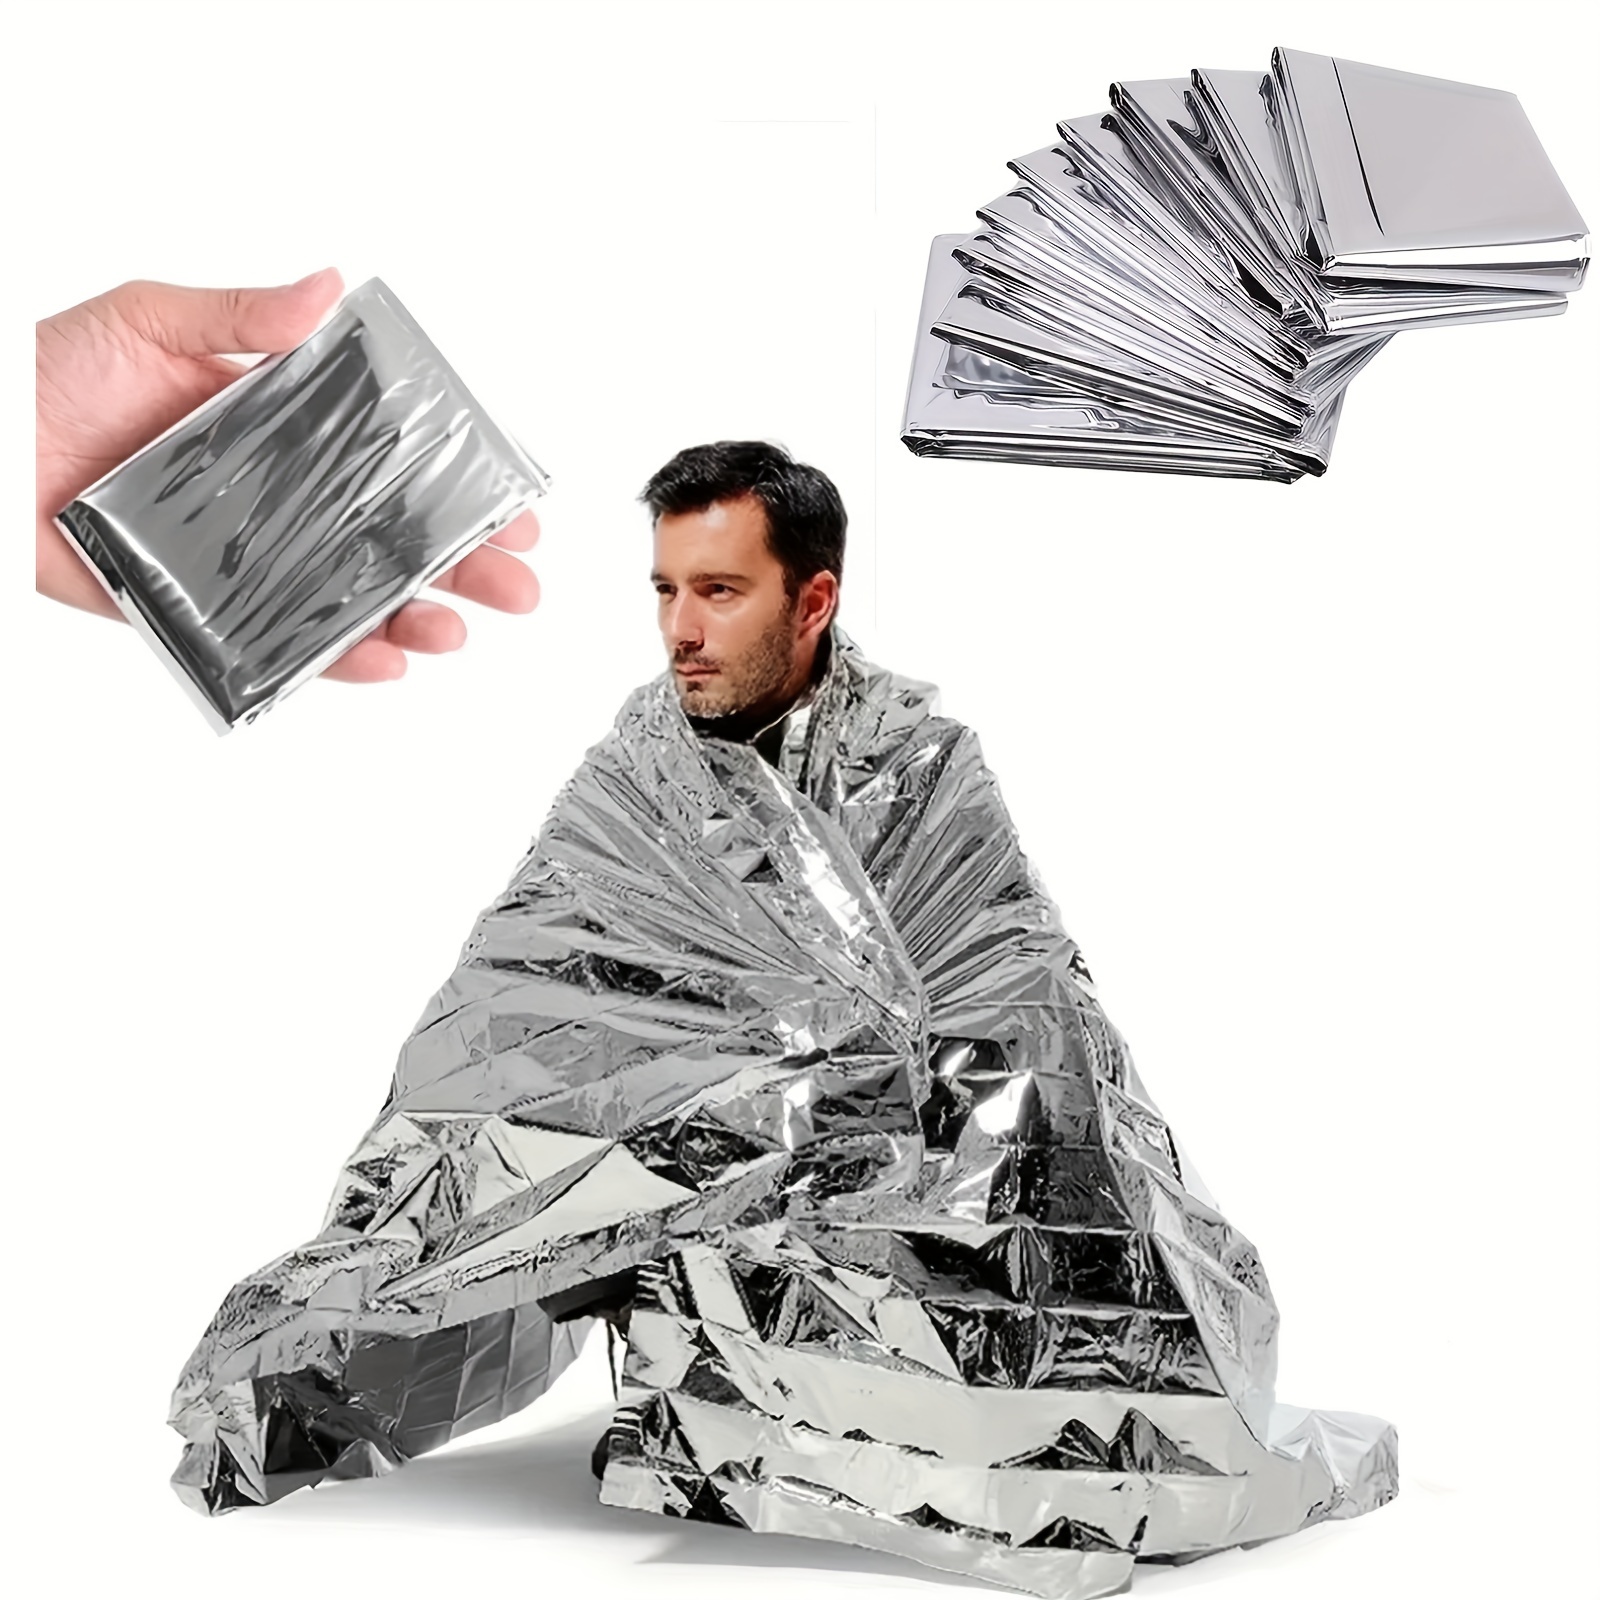 

Compact Emergency Mylar Thermal Blankets - Waterproof & Retains Body Heat - Ideal For First Aid Kits & Natural Disasters - 51.18 X 82.67 Inch